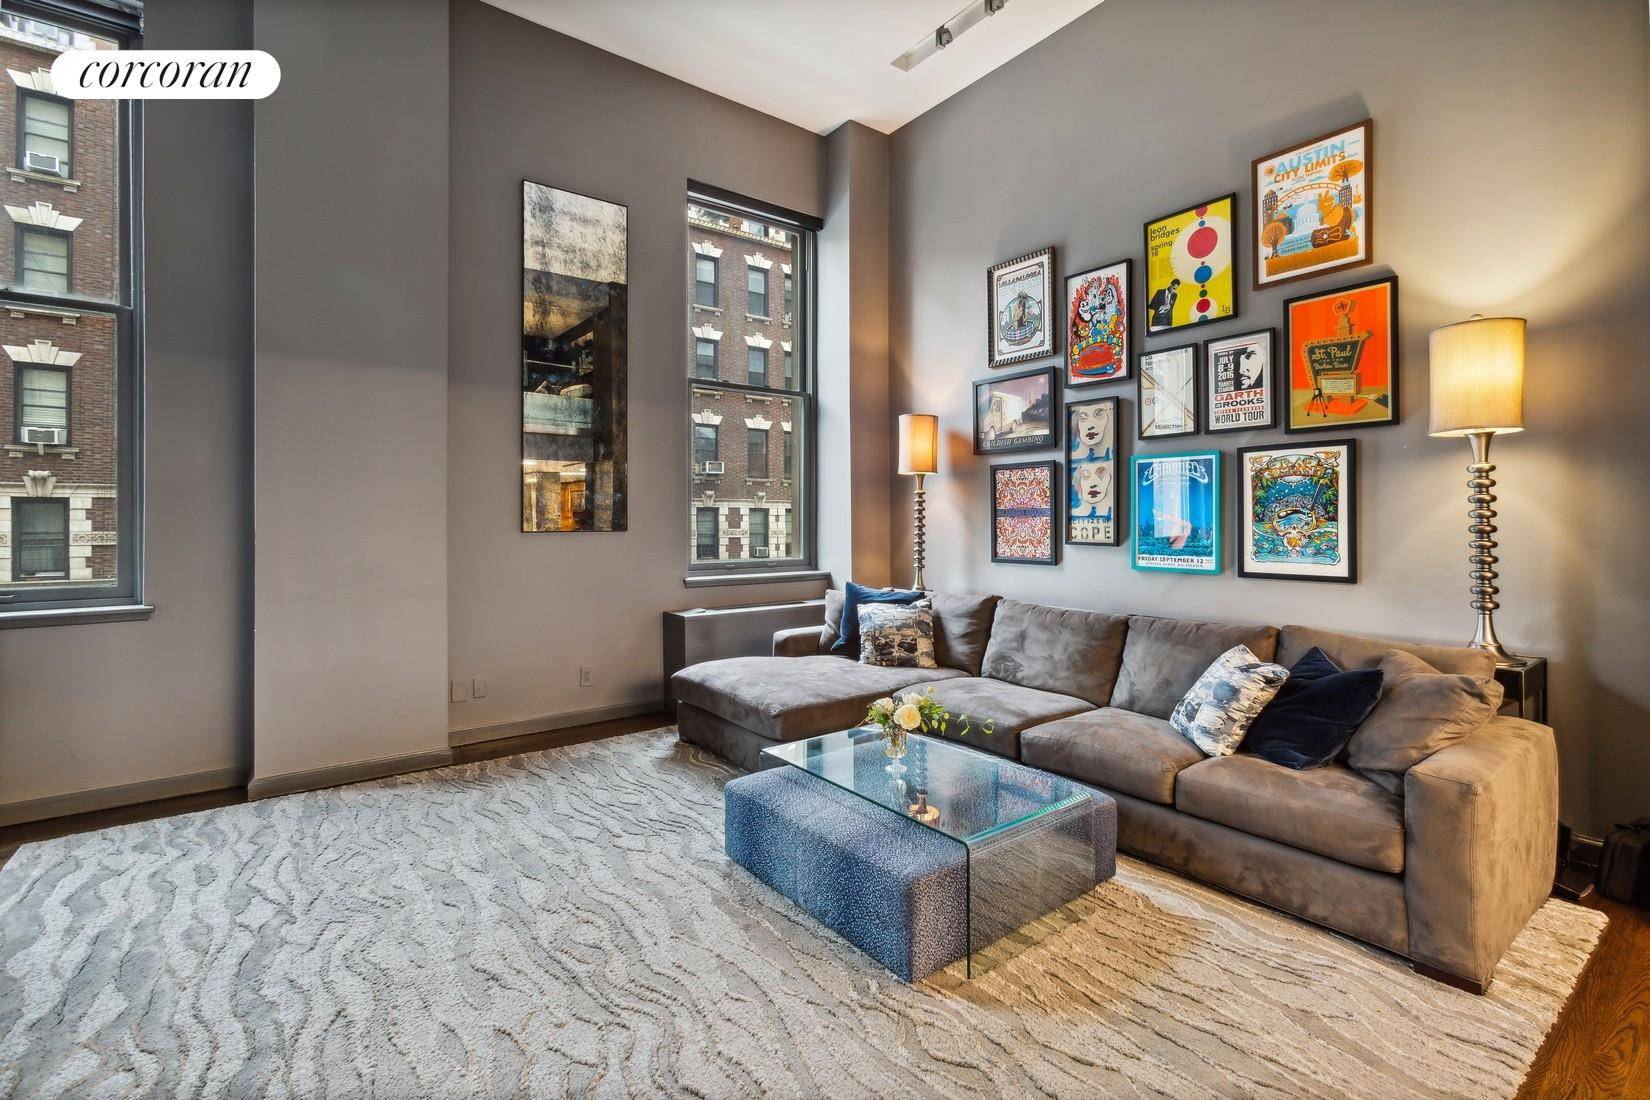 305 Second Avenue, Apt. 318, New York, NY 10003Located in Gramercy Park's elegant historic Rutherford Place, this massive 2 bed, 2 bath triplex condo with loft and private patio is ...